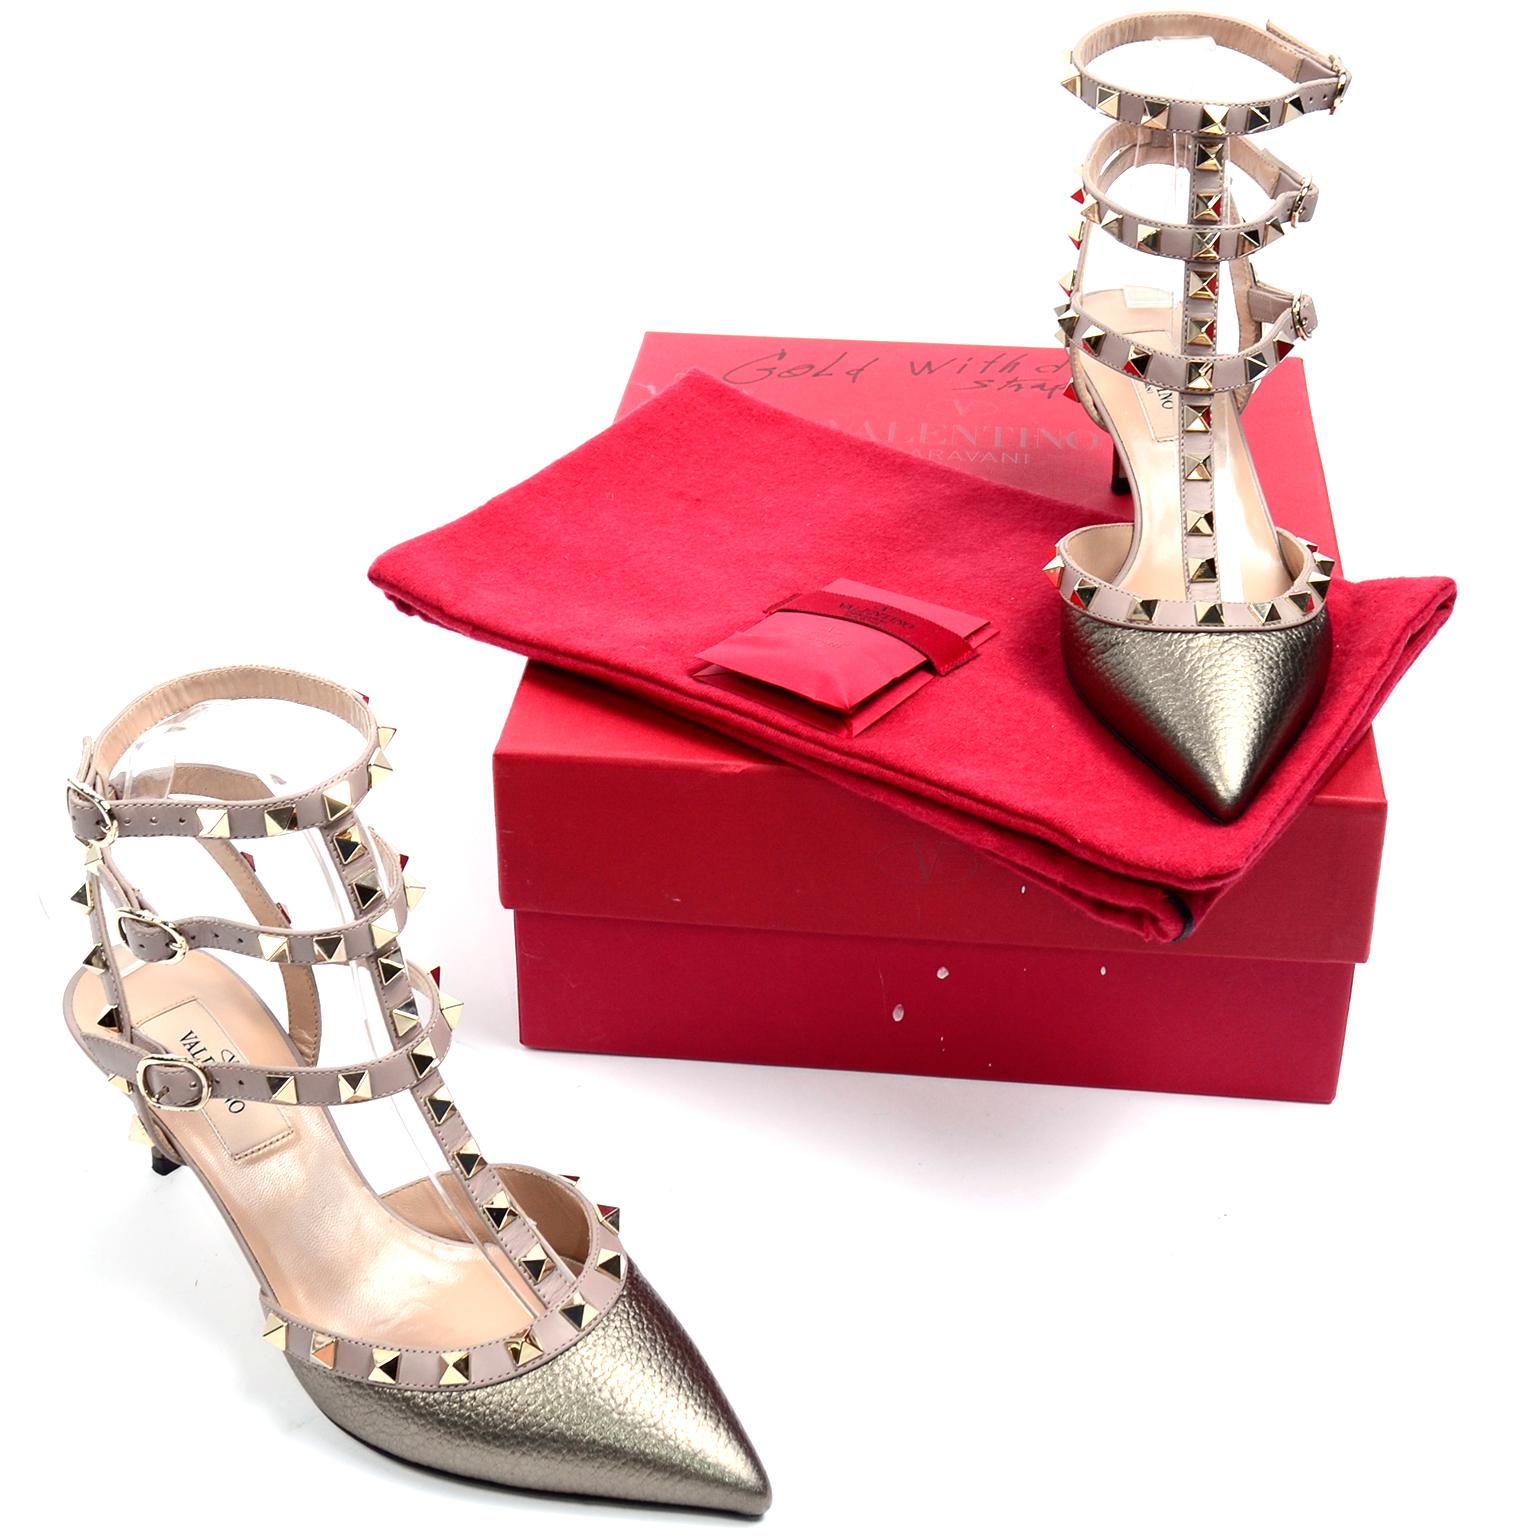 These Valentino Garavani Rockstud pumps are in a metallic dark gold leather and they feature 3 ankle strap side buckle fastenings, a pointed toe, a branded insole and a low stiletto heel. The gold-tone Rockstud embellishments are a Valentino